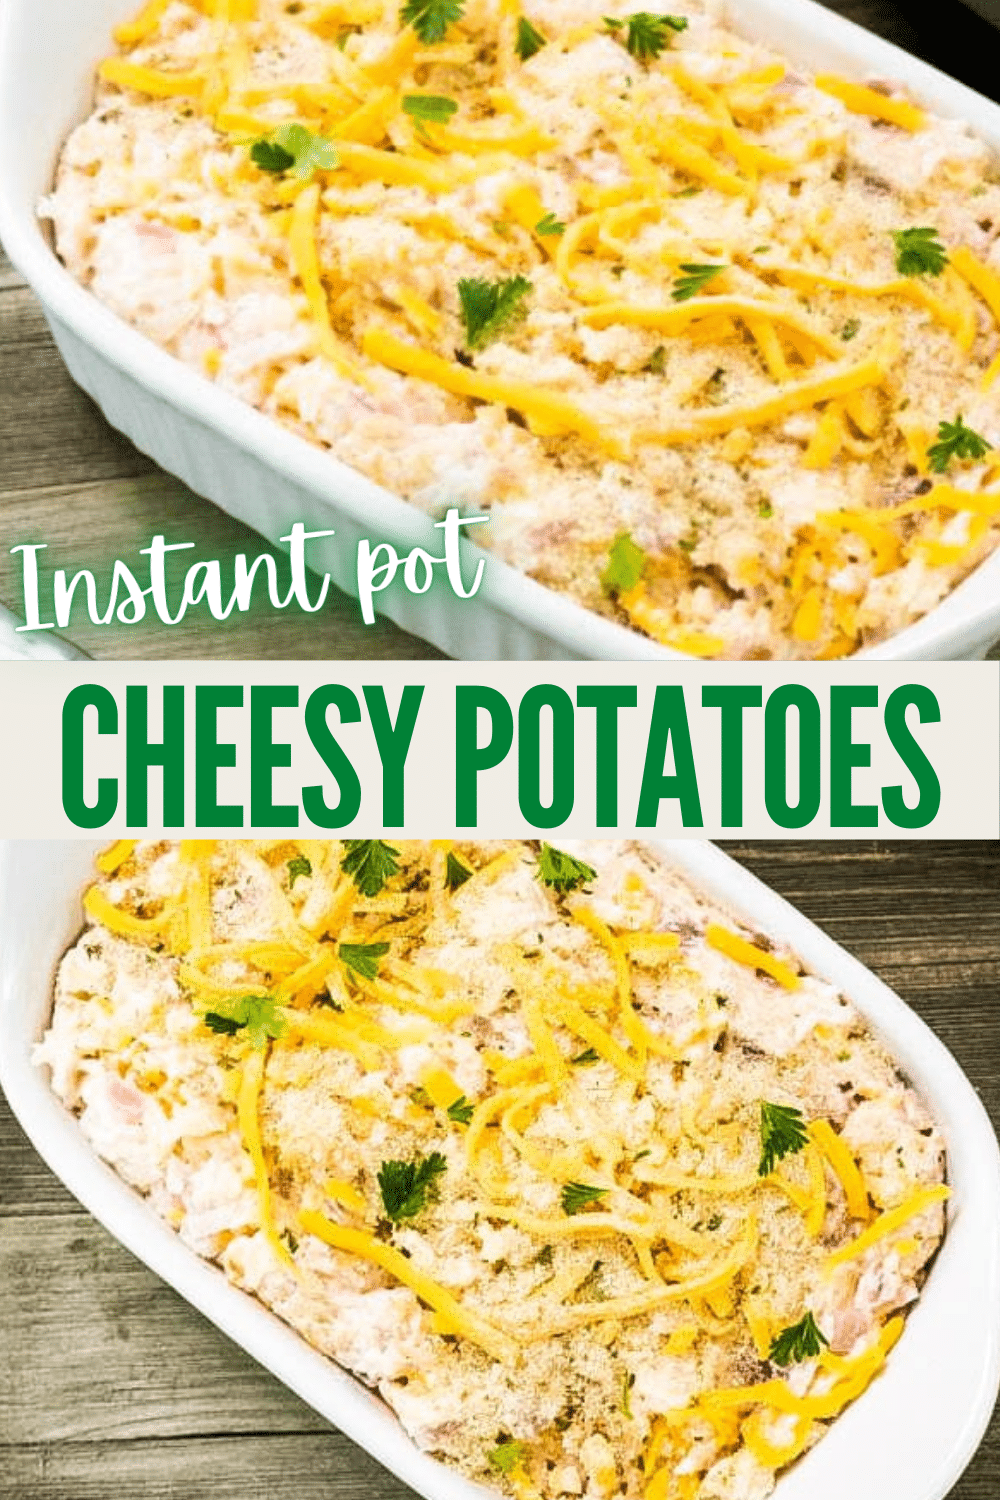 These Instant Pot Cheesy Potatoes (also known as Funeral Potatoes) are always the most popular side dish at potlucks. This creamy, cheesy comfort food is super yummy and goes well with almost anything! #instantpot #pressurecooker #sidedish #potatoes #wondermomwannabe via @wondermomwannab